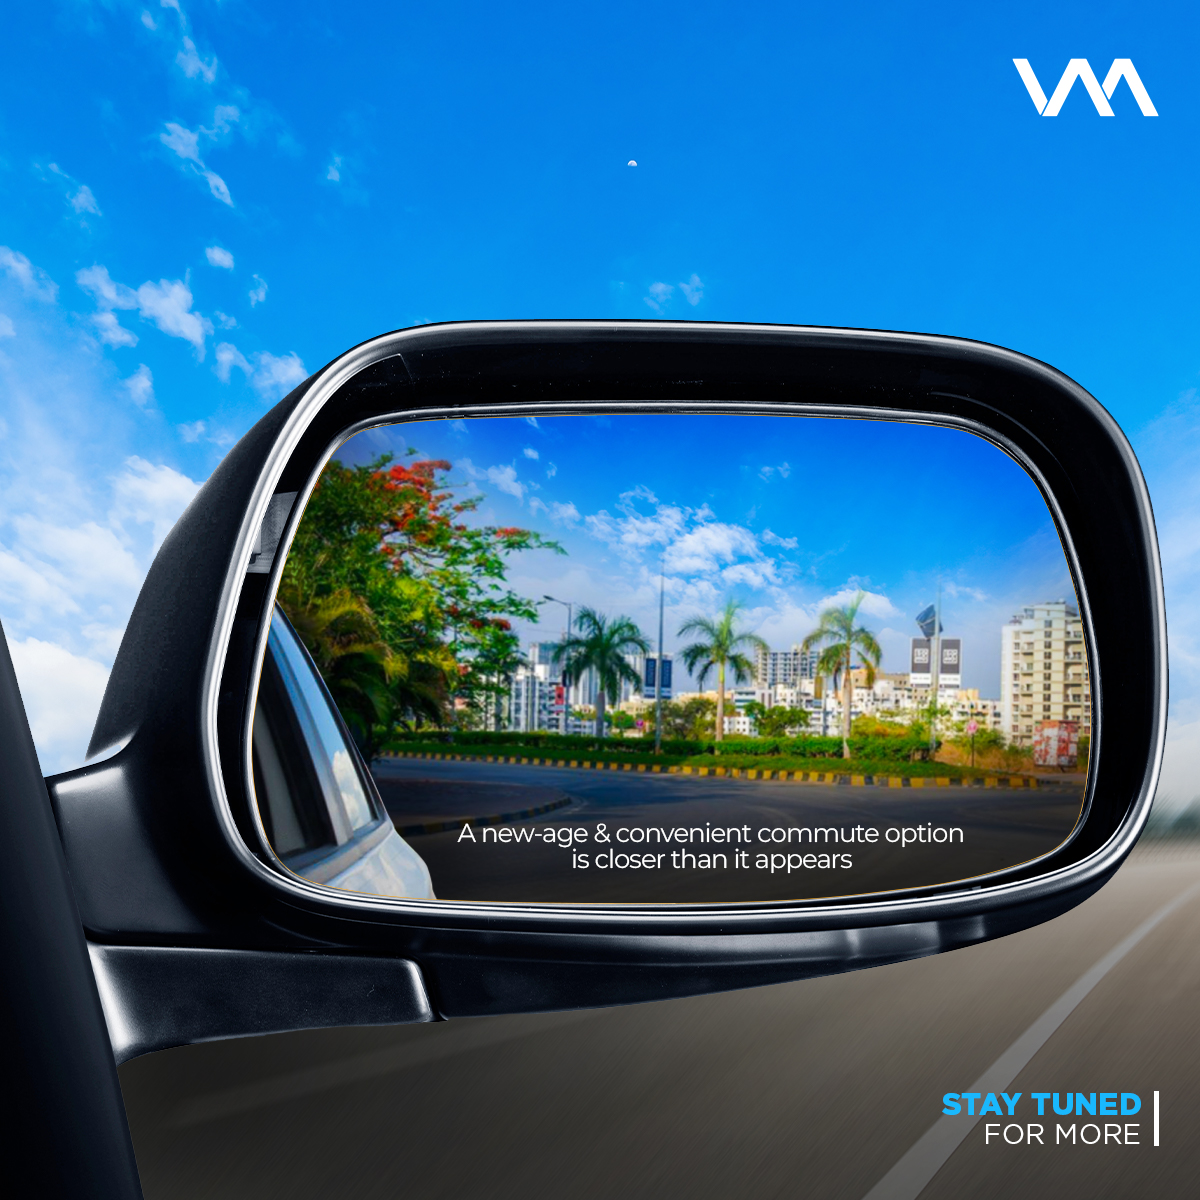 A sustainable yet modern urban commute option will soon be your way!

Stay with us for more details.

#electriccar #ev #electricvehicle #electricmobility #vayve #vayvemobility #eva  #urbantravel #vayve_eva #indiasfirstsolarcar #solarcar #electriccar #microEV #smartcar